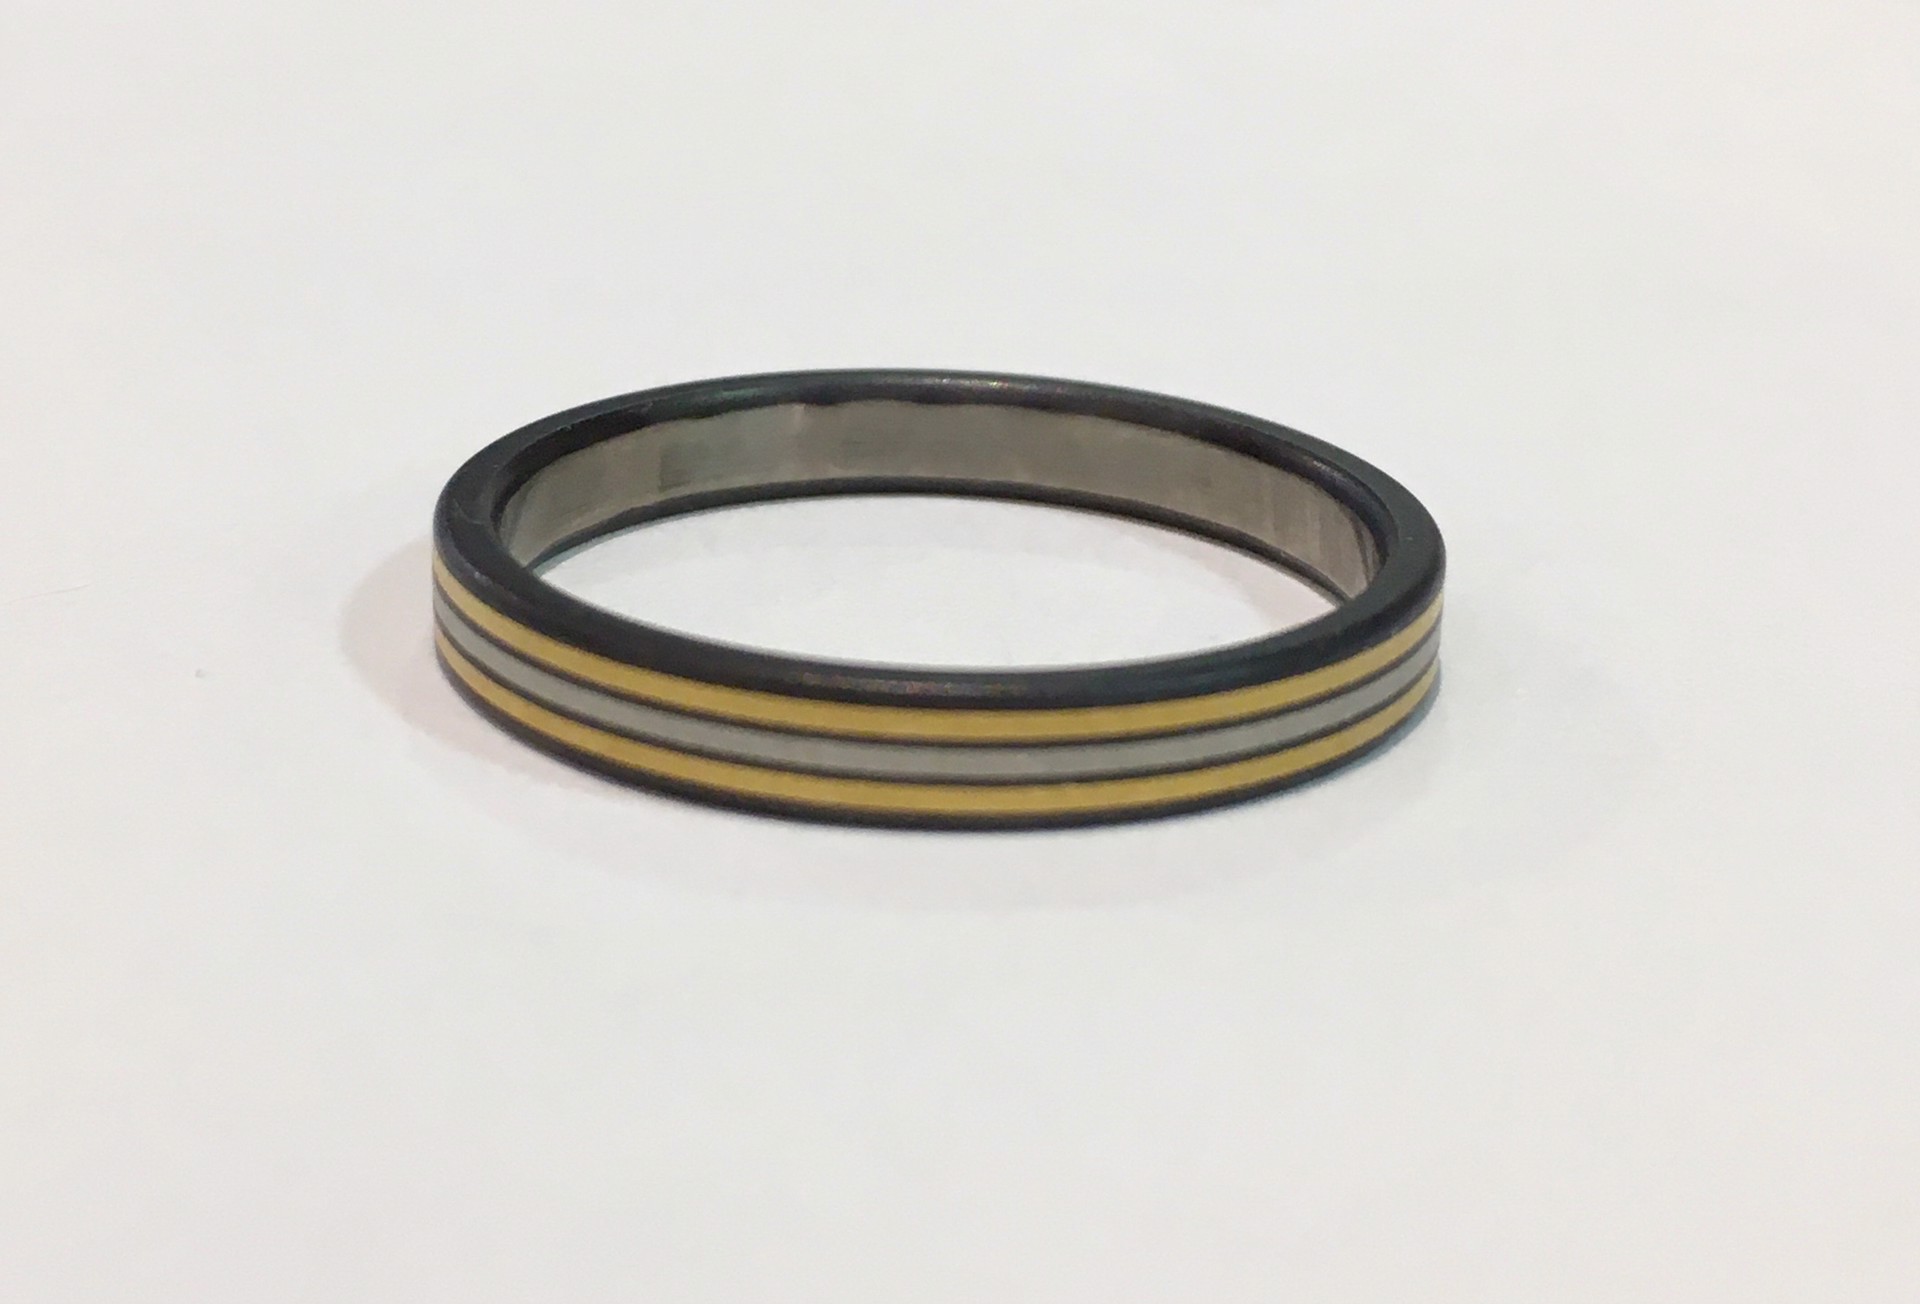 Titanium, 24K gold, and Platinum Band (SOLD) by WES & GOLD